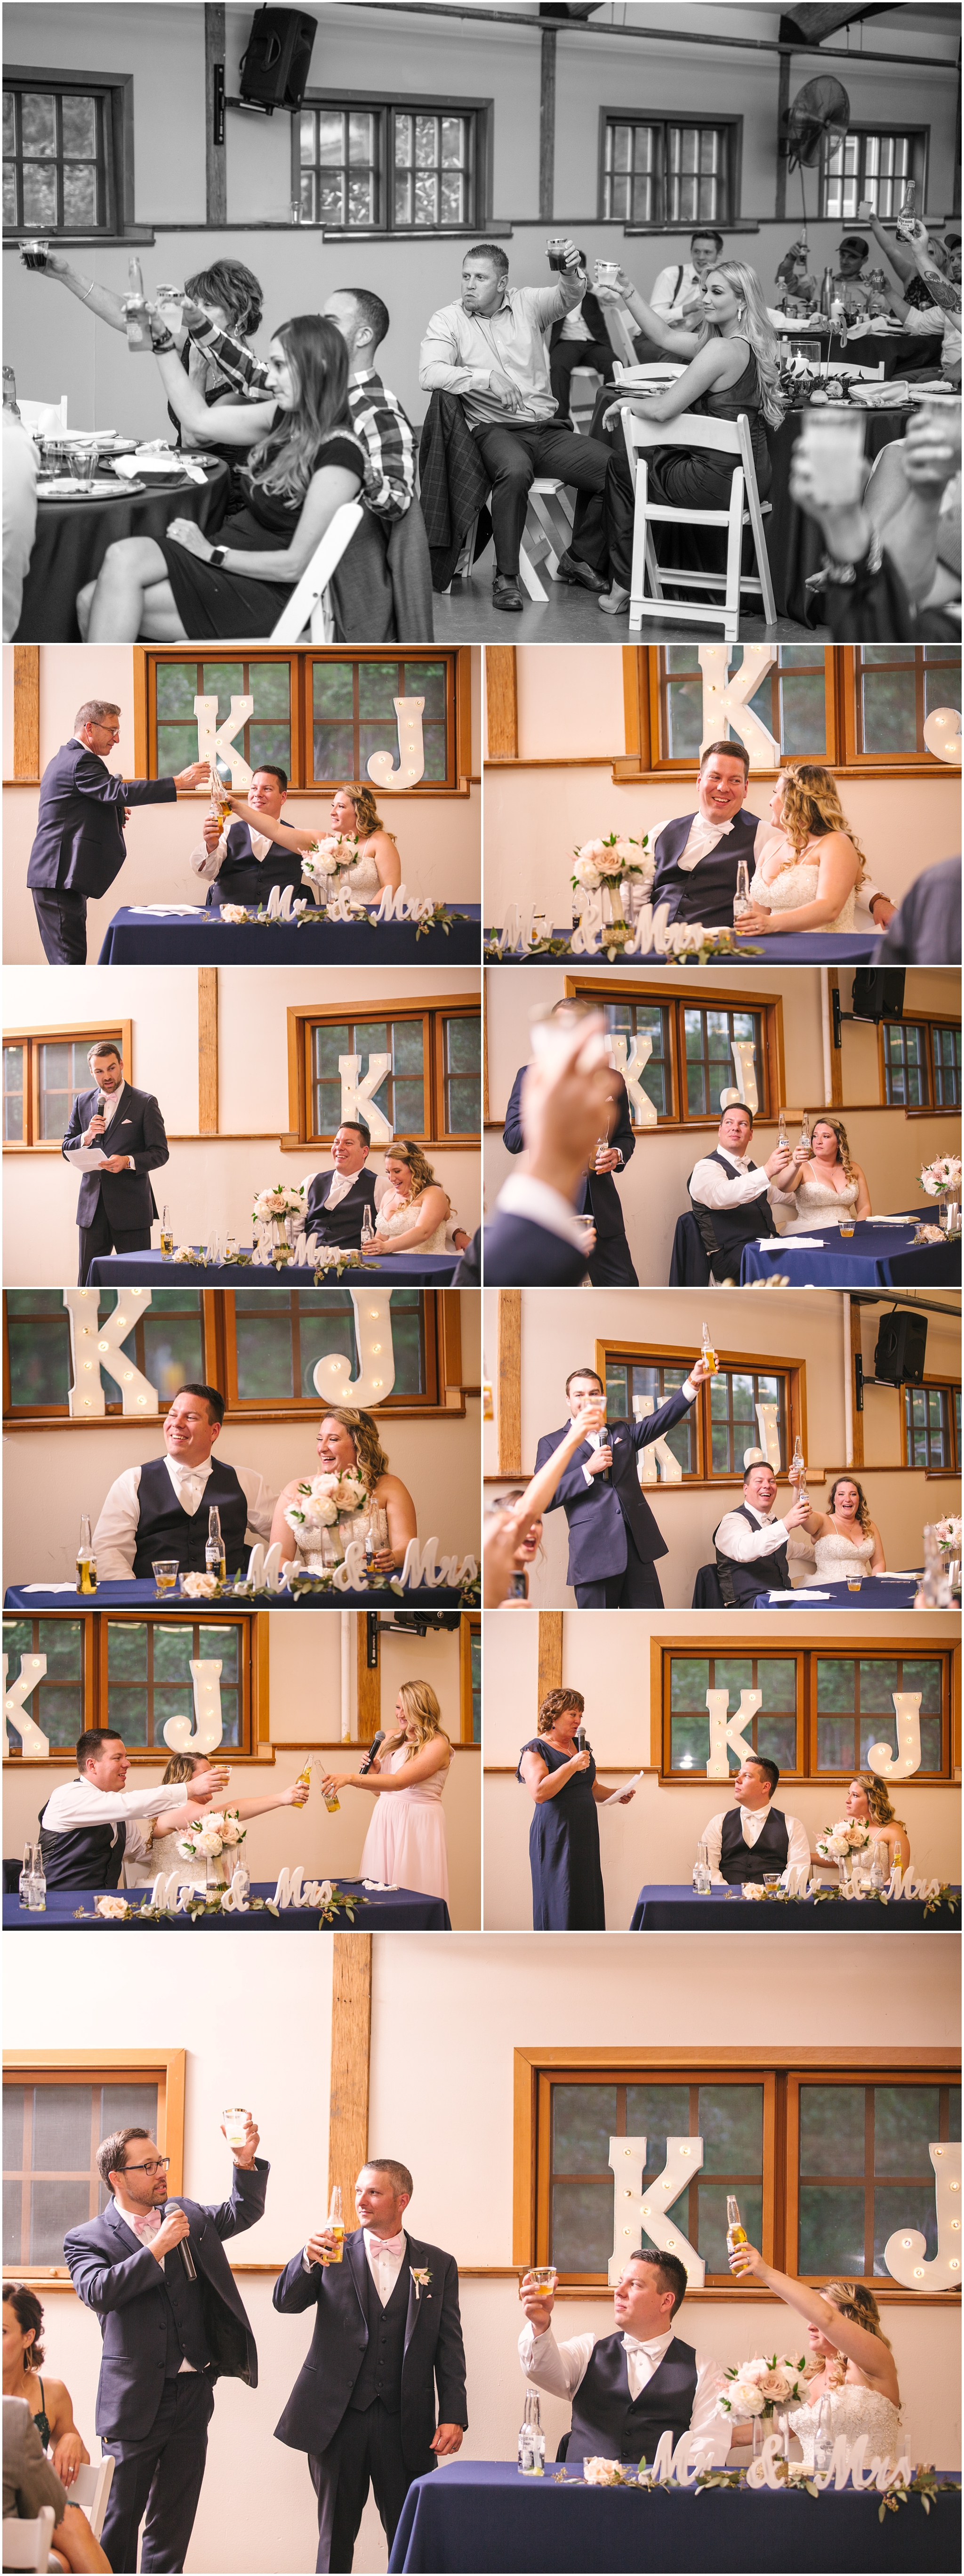 Toasts to the bride and groom at Pickering Barn wedding reception in Issaquah Washington